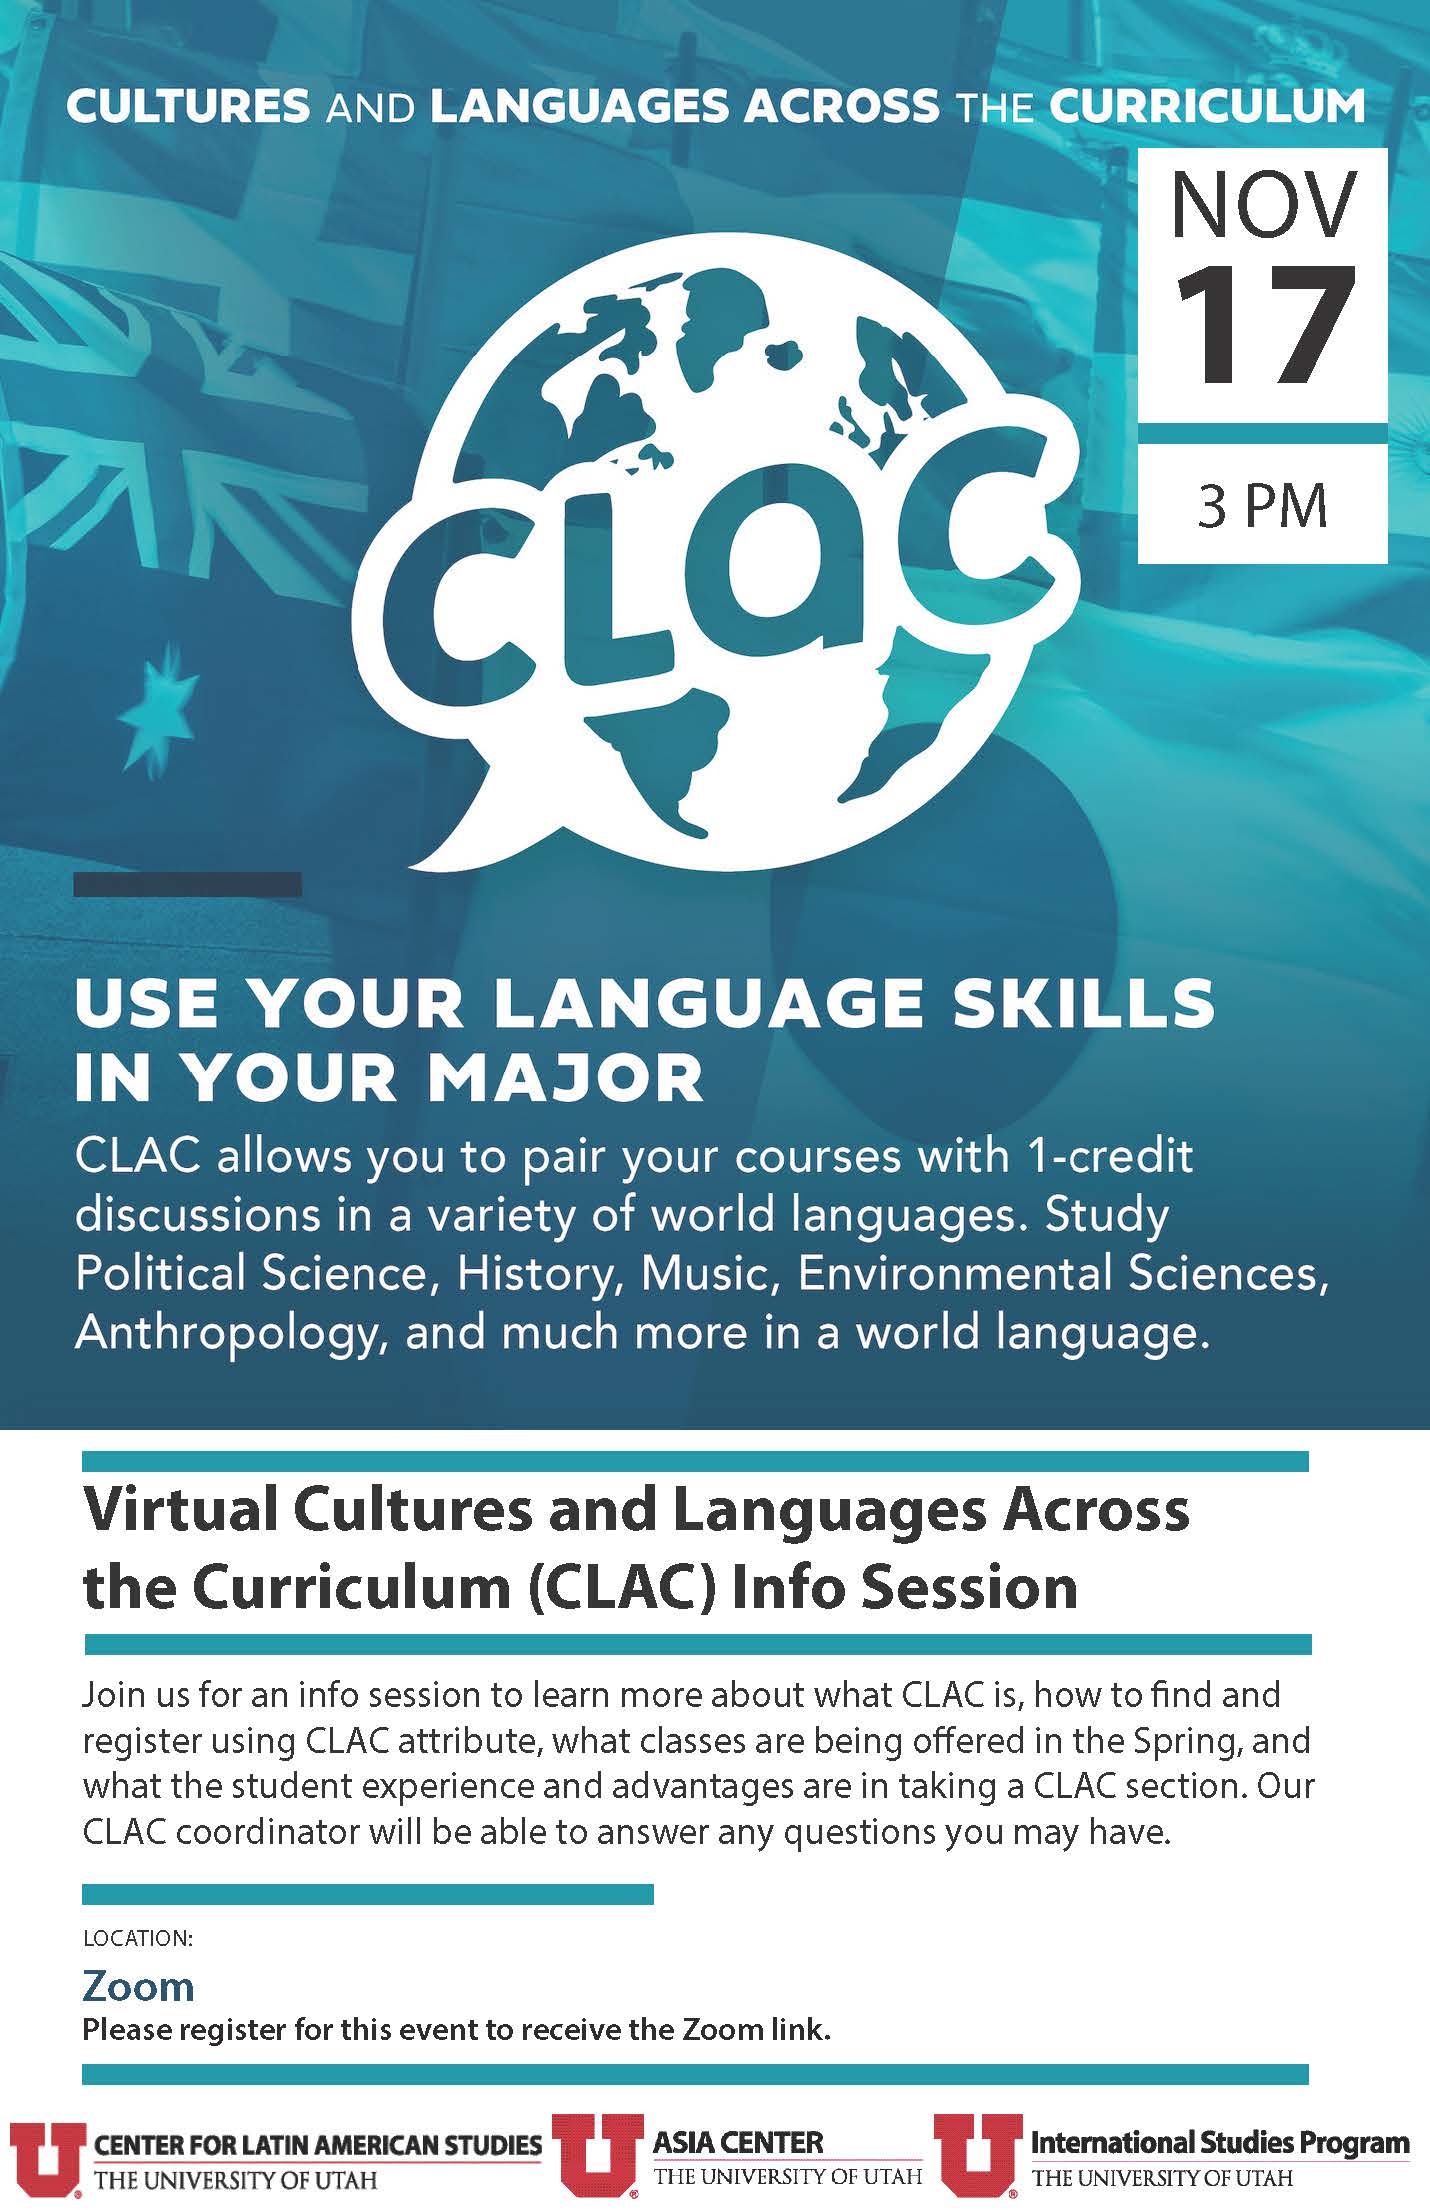 Flyer with CLAC description and info session